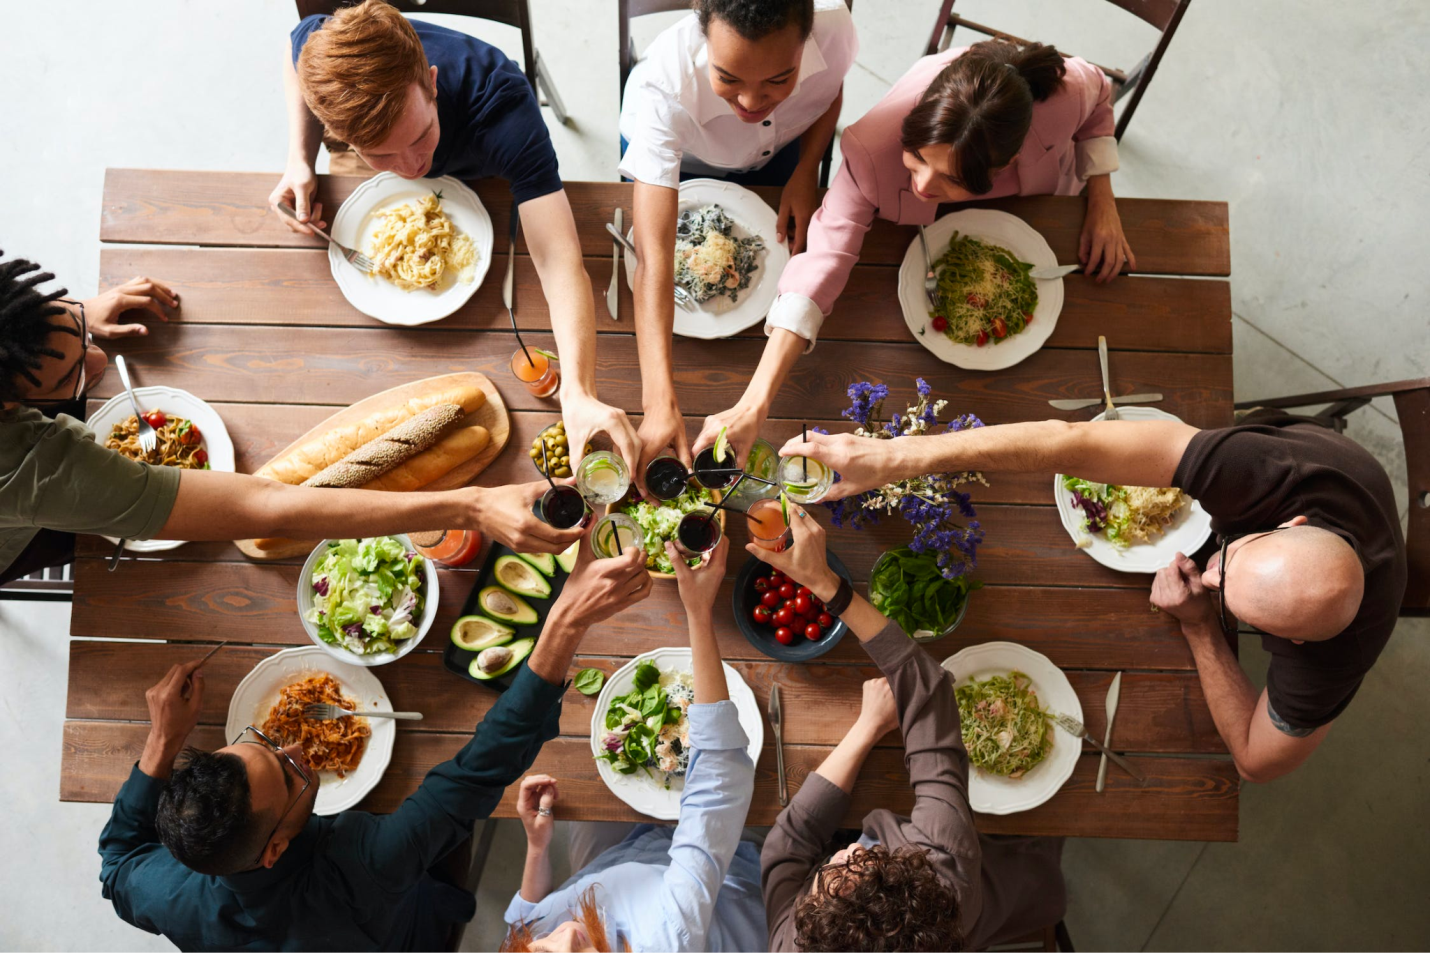 An overhead view of a table with dinner guests at a table.